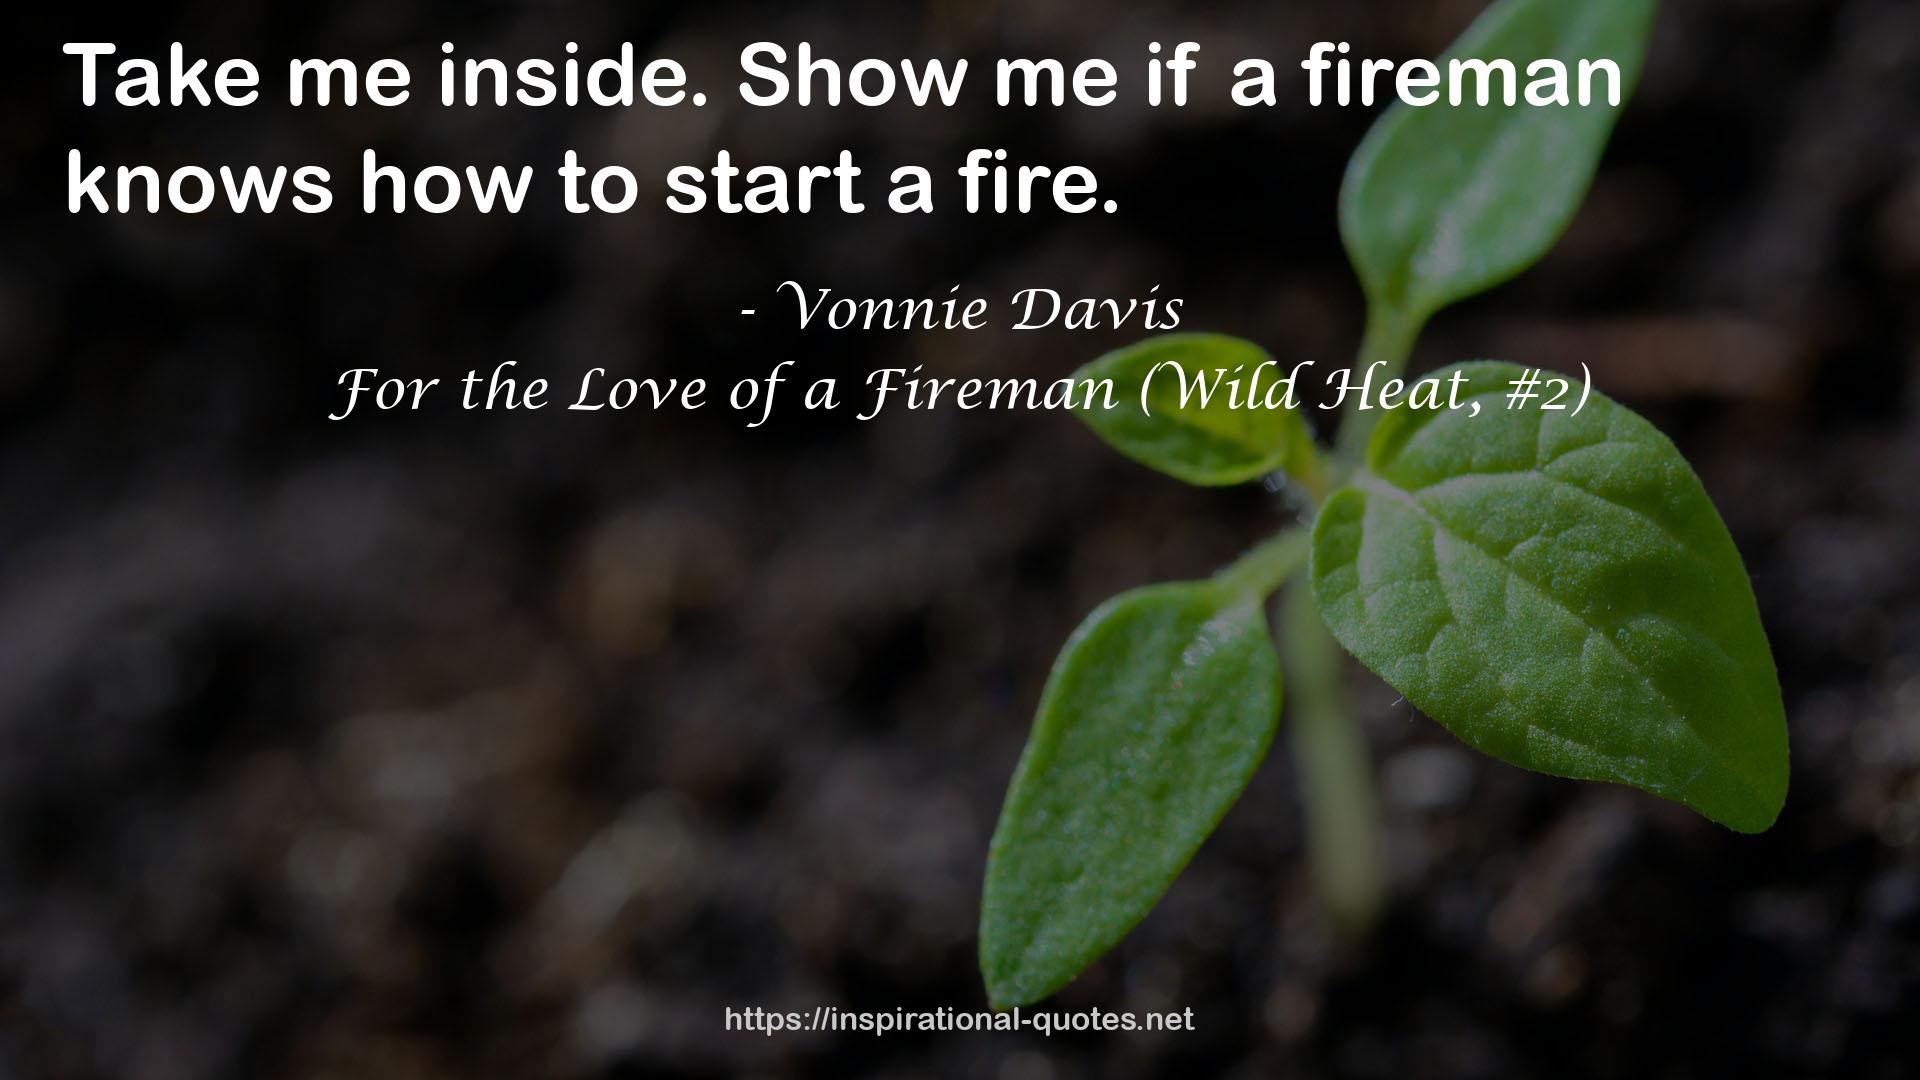 For the Love of a Fireman (Wild Heat, #2) QUOTES